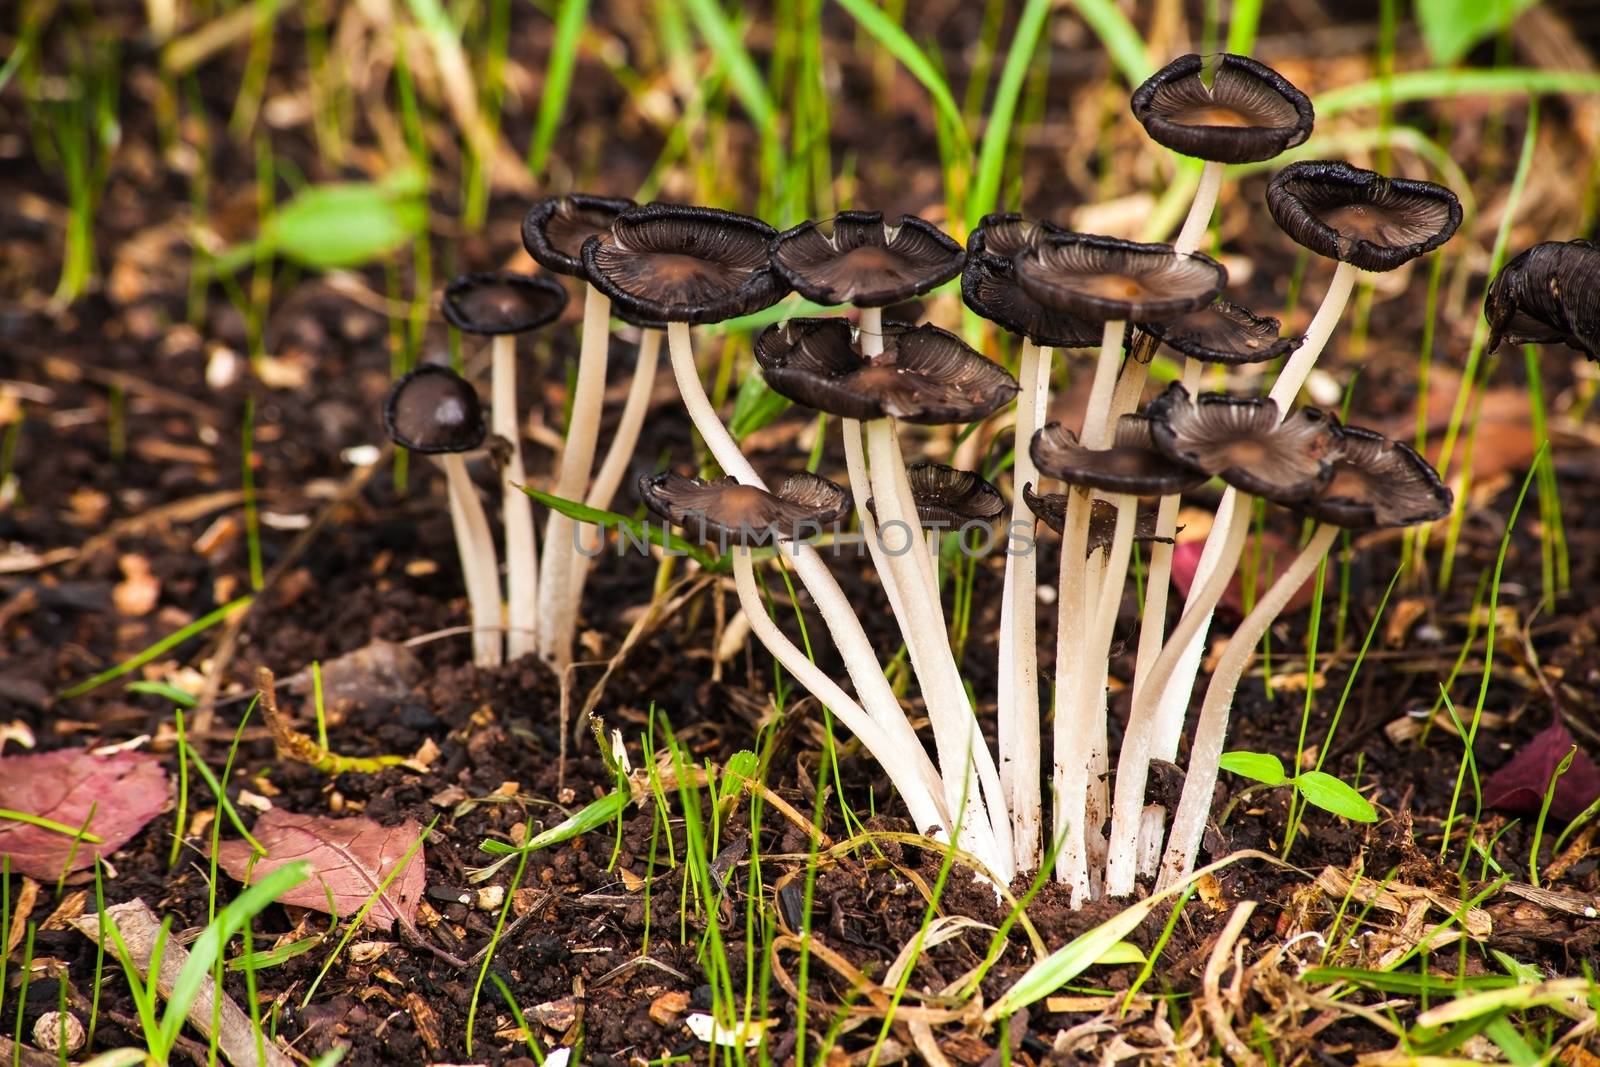 A group of small mushrooms photographed in macro.